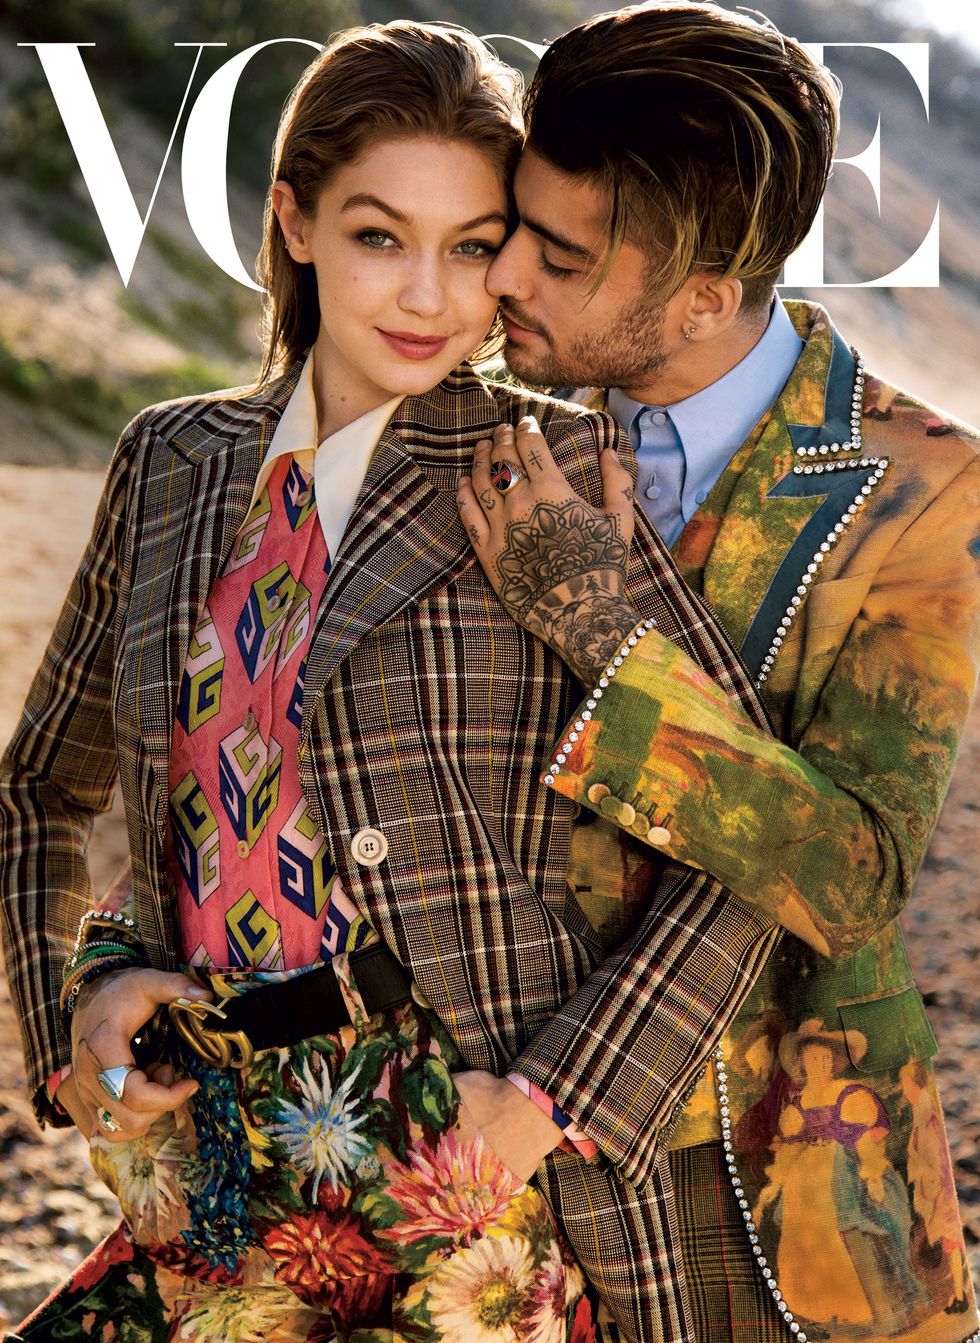 Why Gigi Hadid and Zayn Malik Are Not the Faces of the “Genderfluid Community”